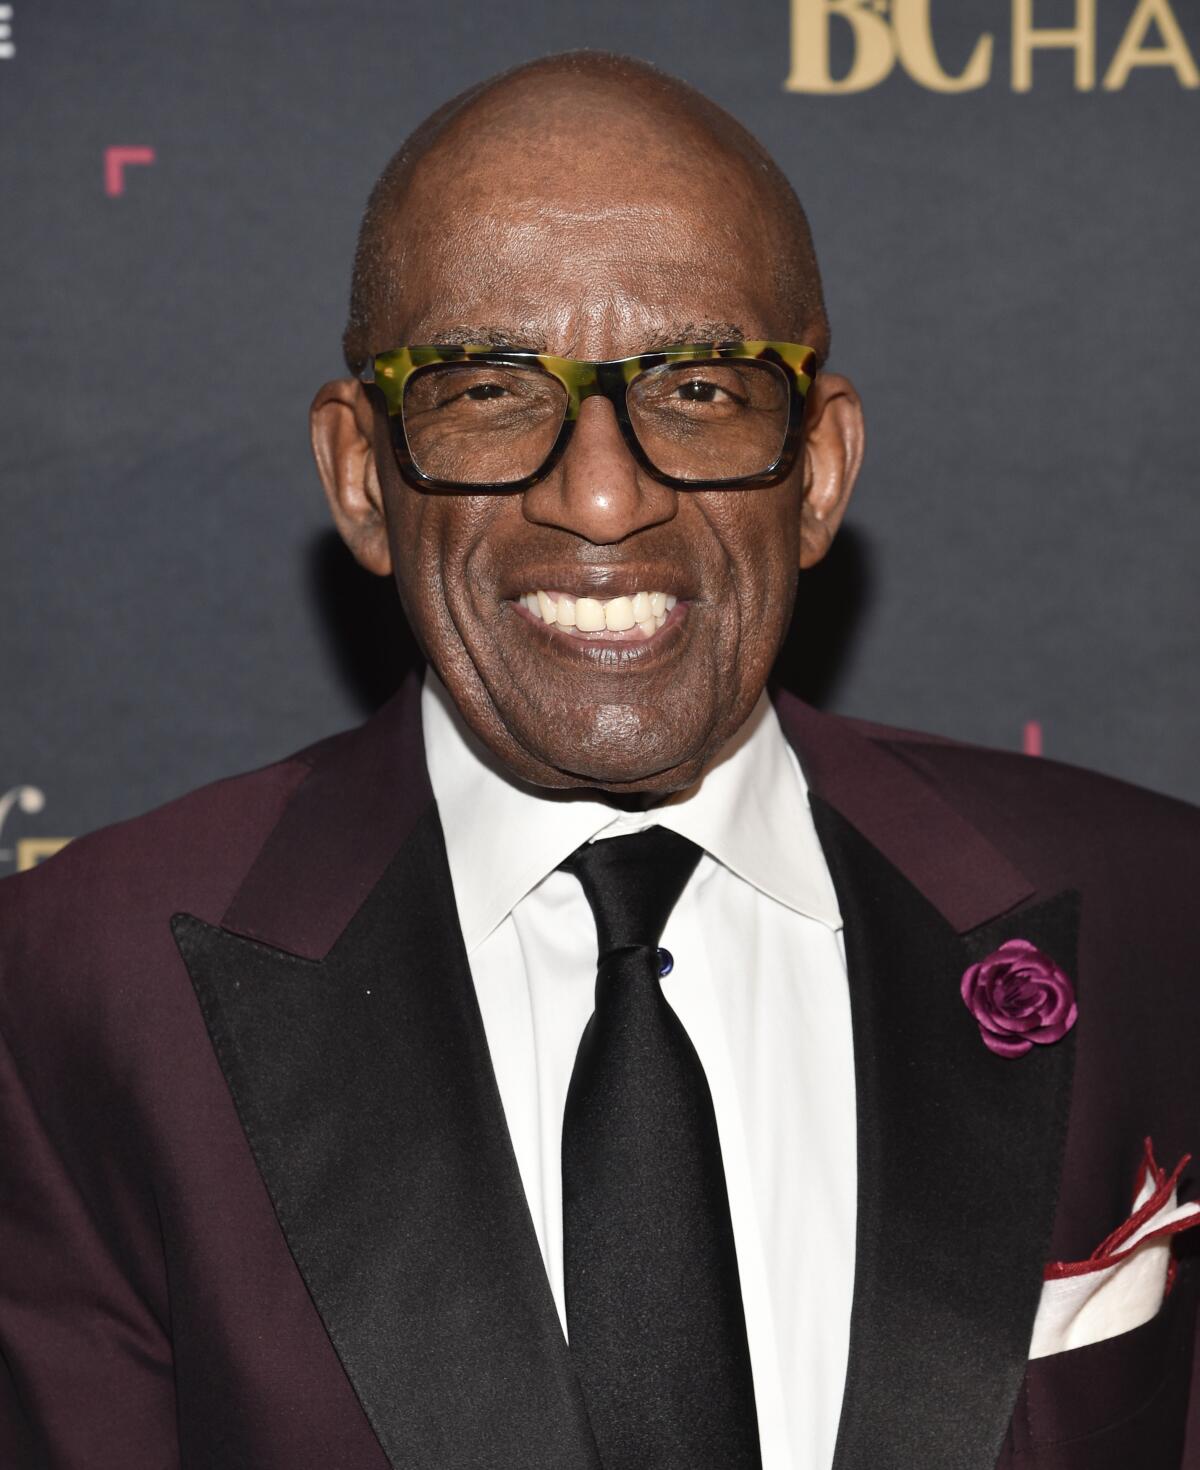 Al Roker smiling in a burgundy suit and tie with a flower on the lapel